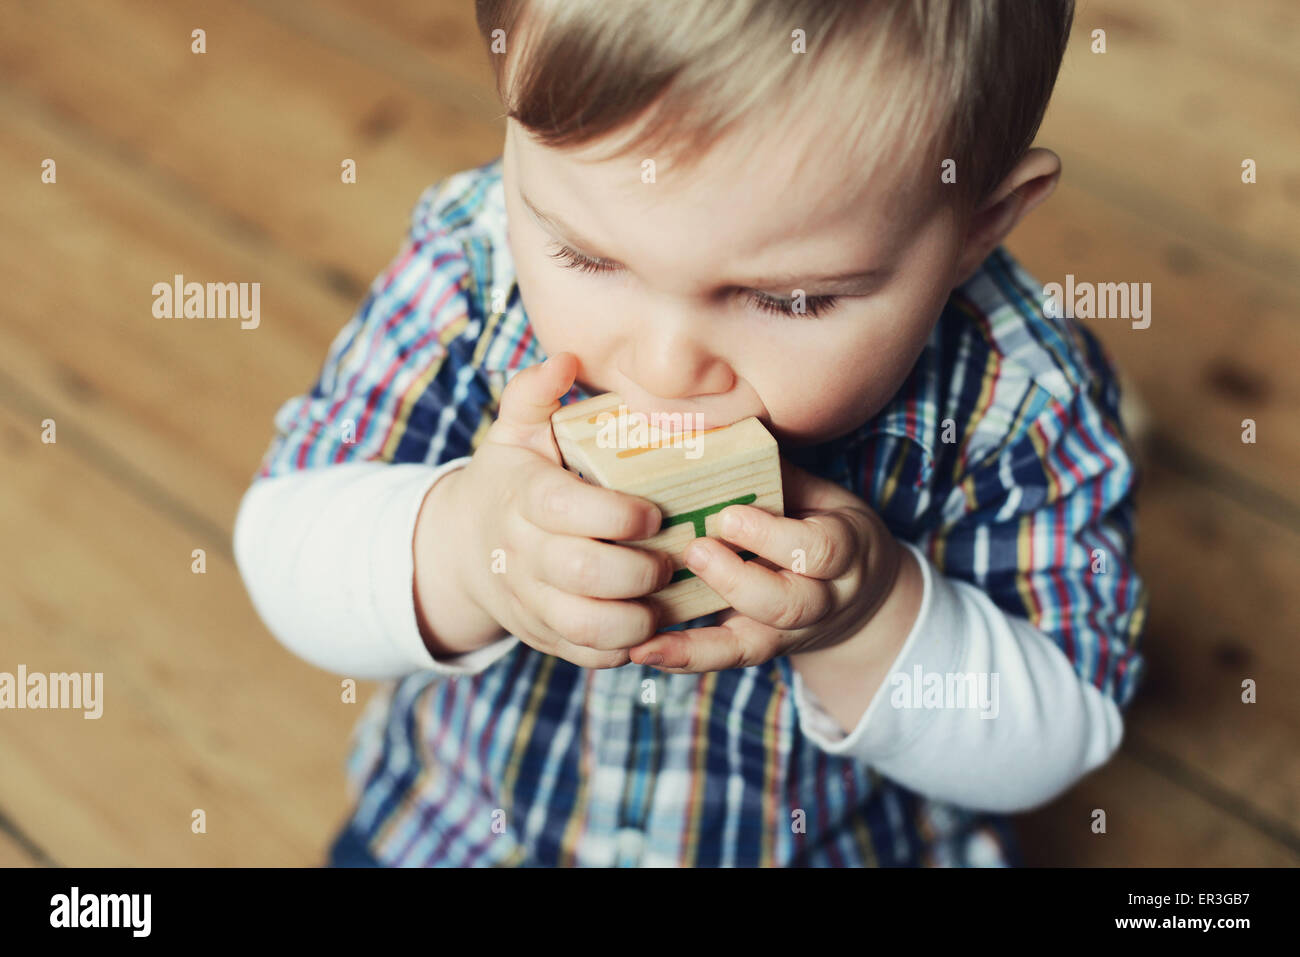 Baby boy chewing on wooden toy block Stock Photo